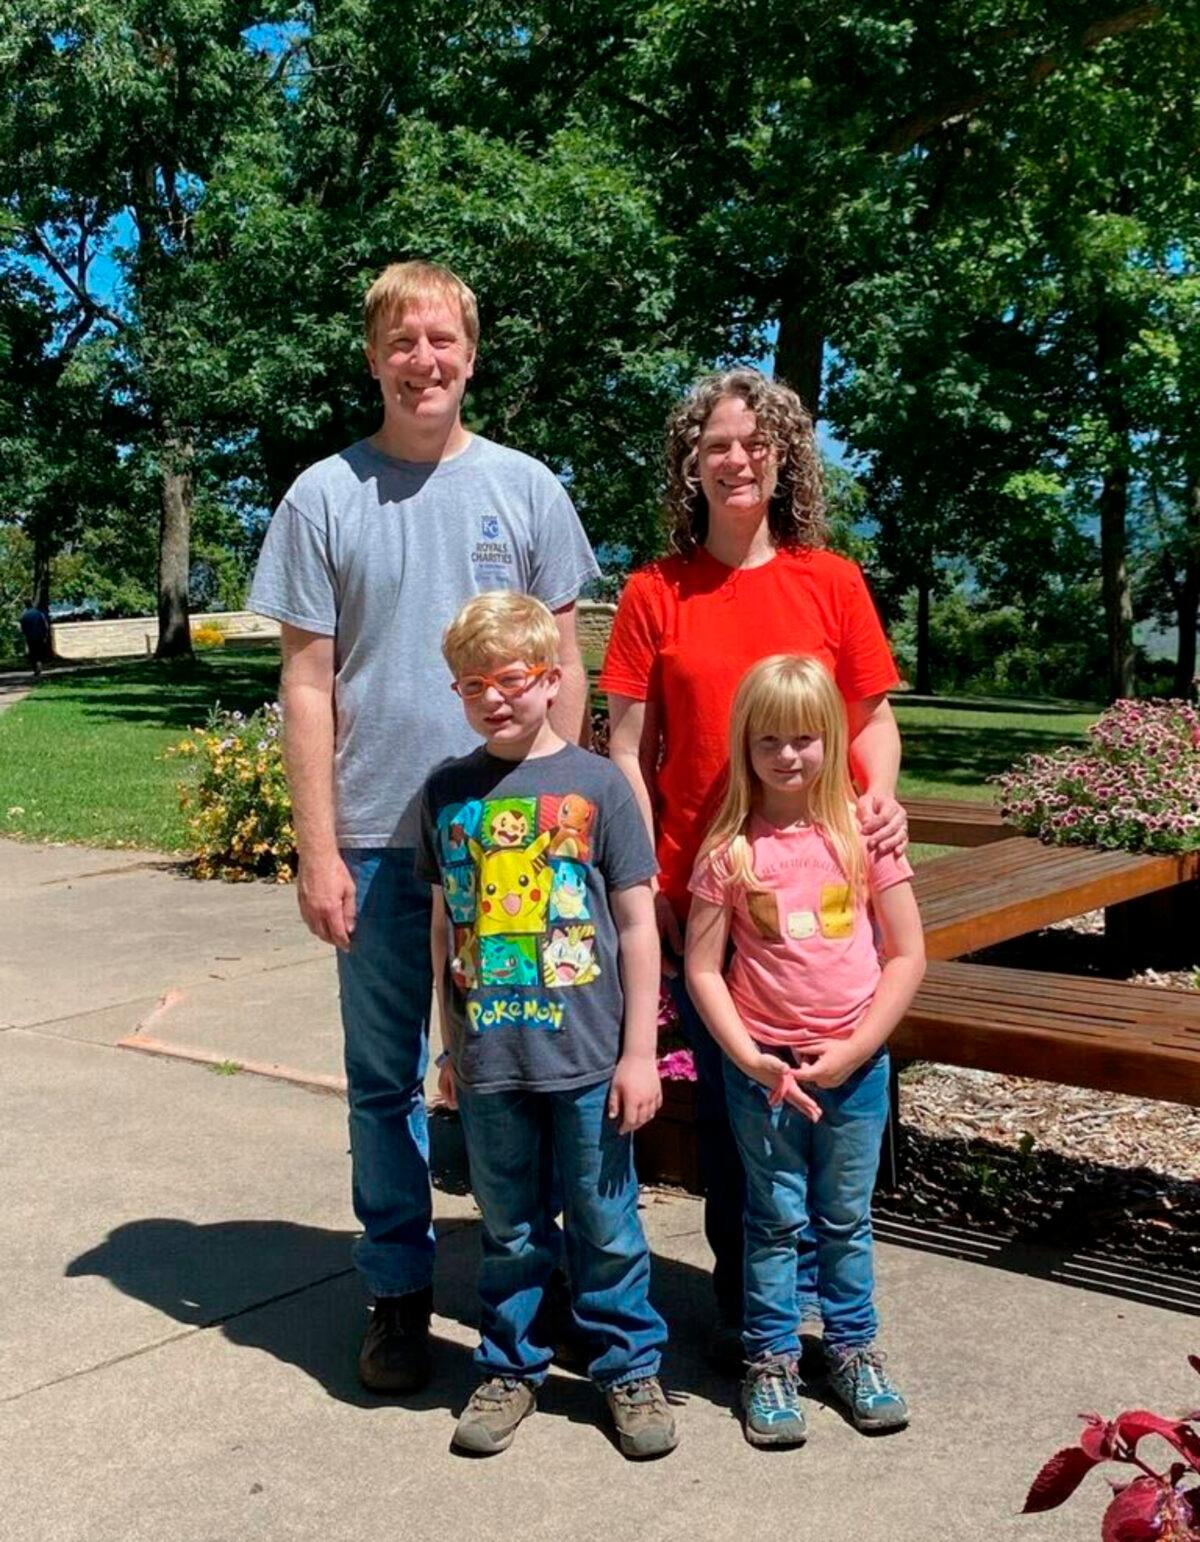 Tyler Schmidt and his wife Sarah pose with their son Arlo and daughter Lula during a family outing in a file photo. (Courtesy of the Schmidt and Morehead families)